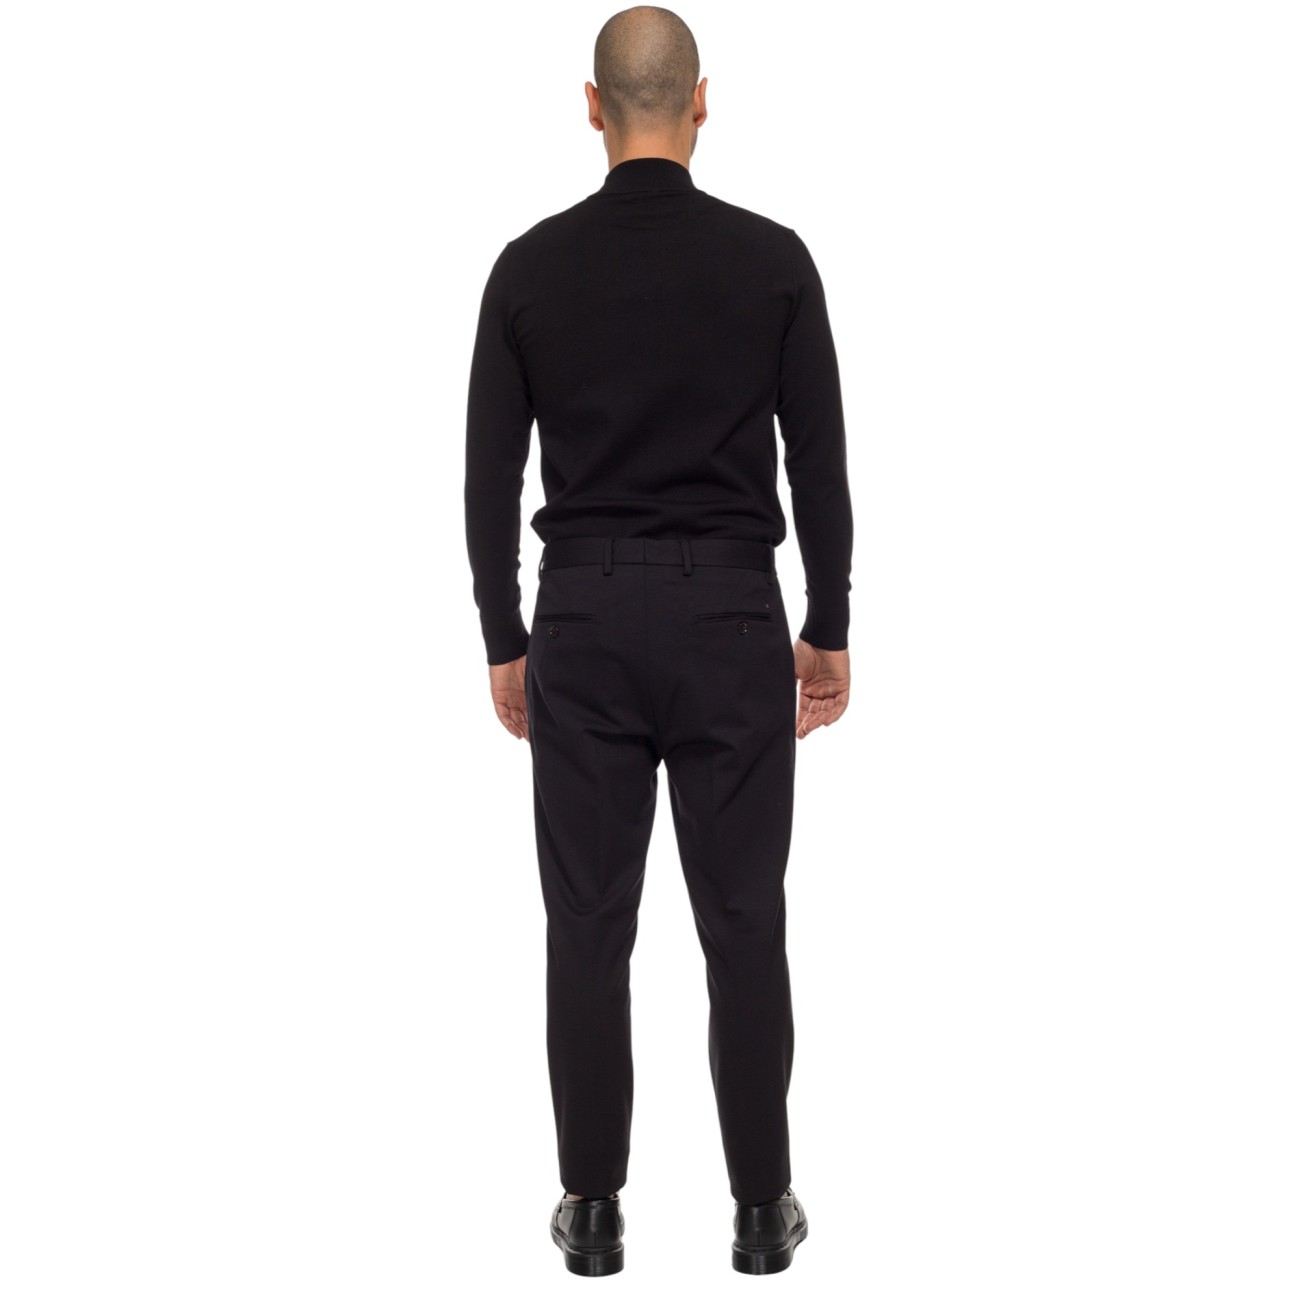 Black trousers outfit